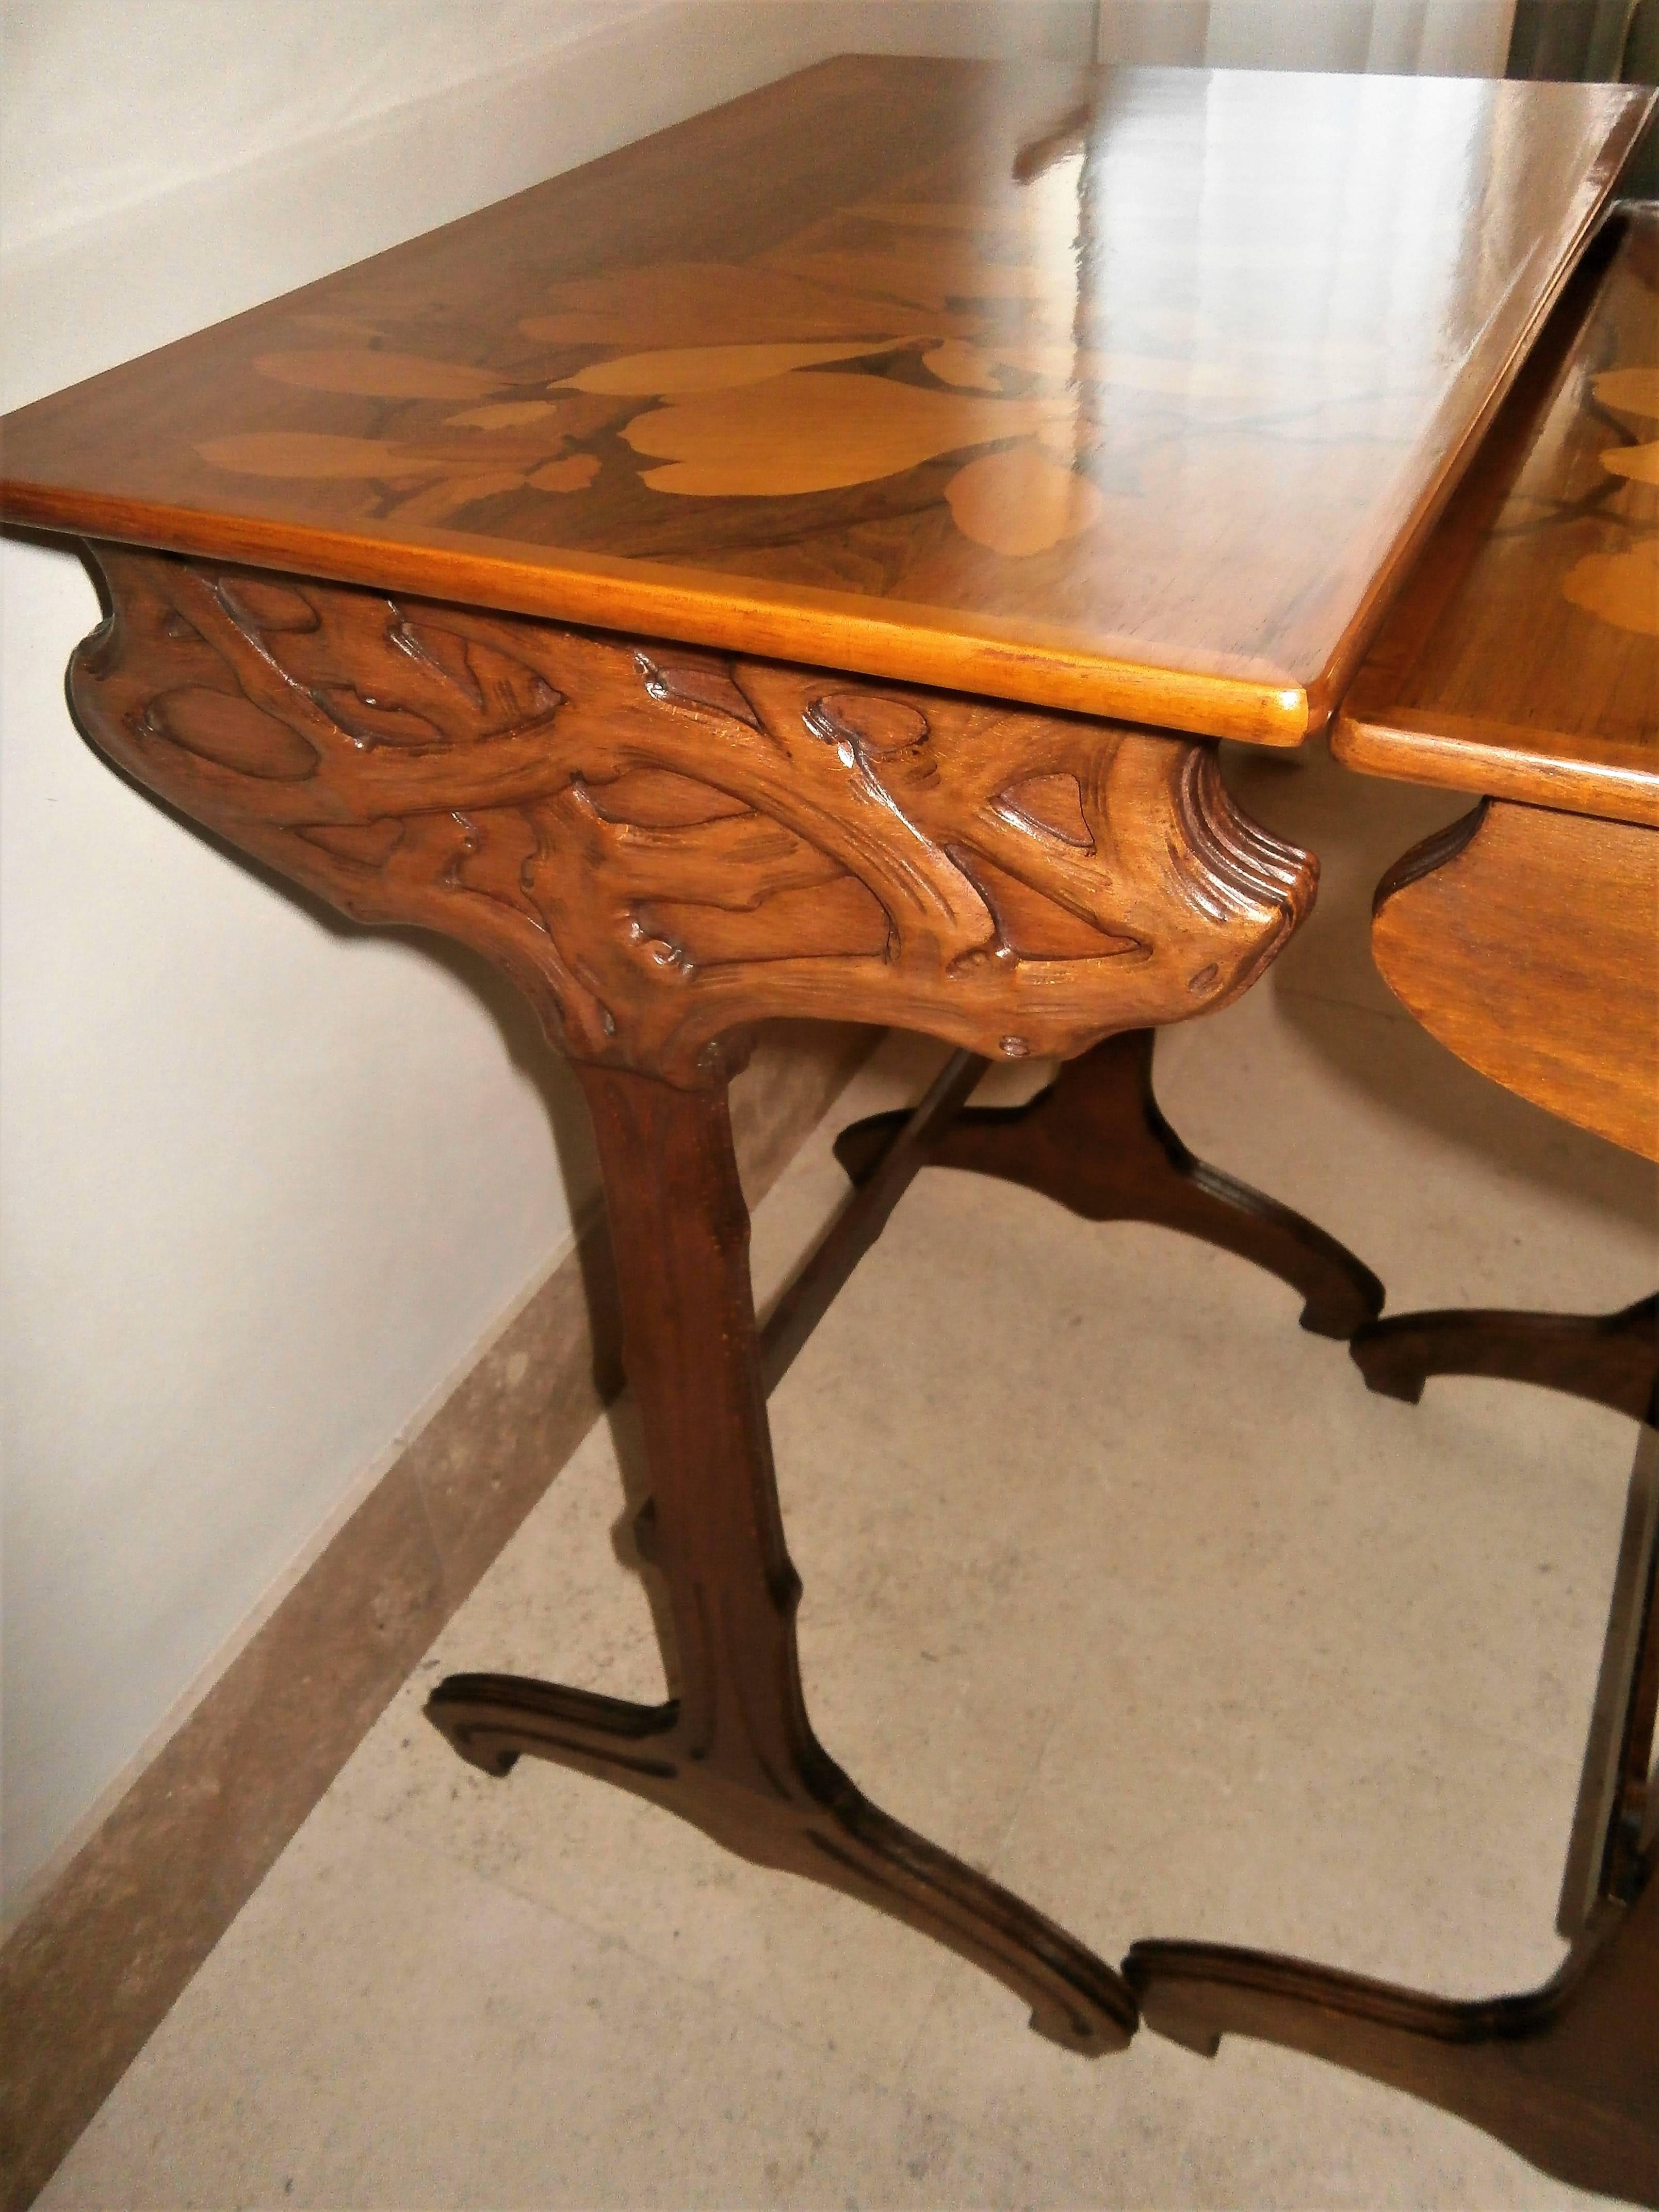 Beech Stunning Art Nouveau Marquetry Nesting Tables Signed by Gallé